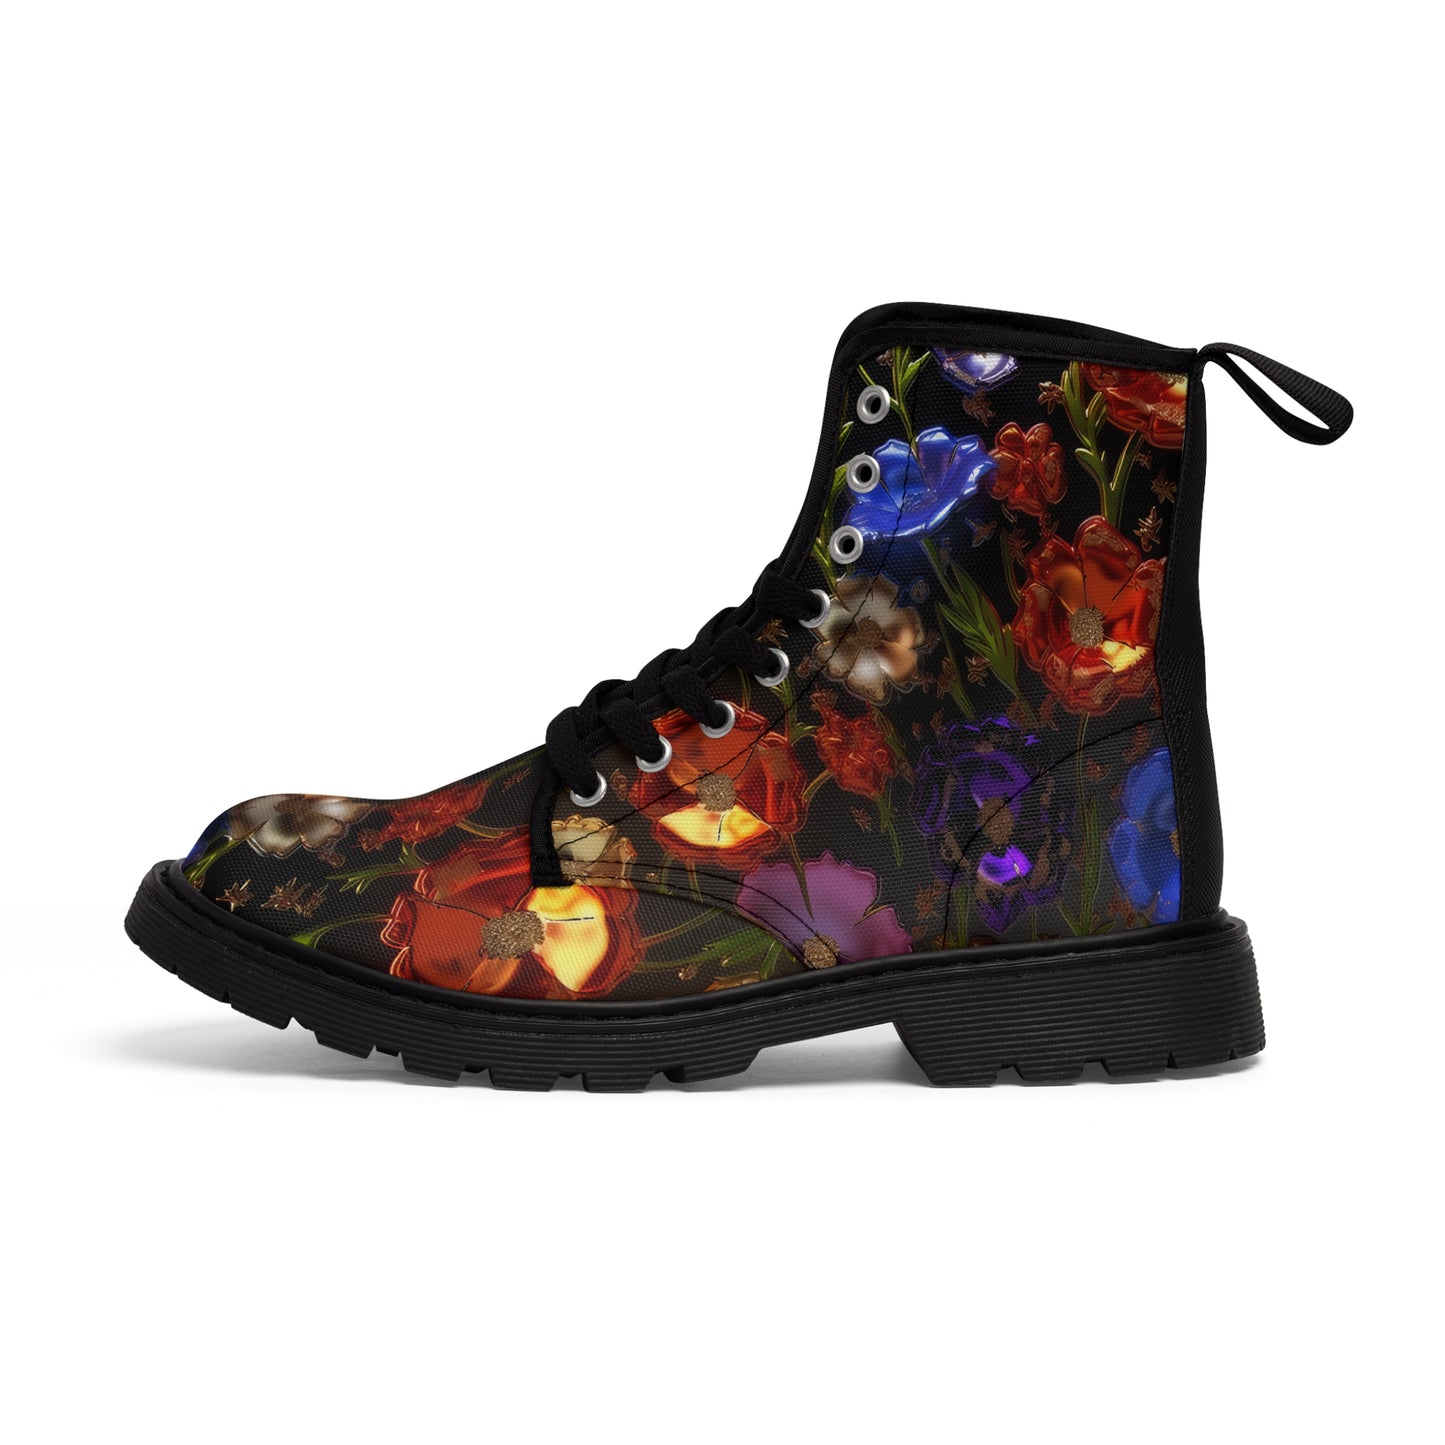 Bold & Beautiful & Metallic Wildflowers, Gorgeous floral Design, Style 7 Women's Canvas Boots